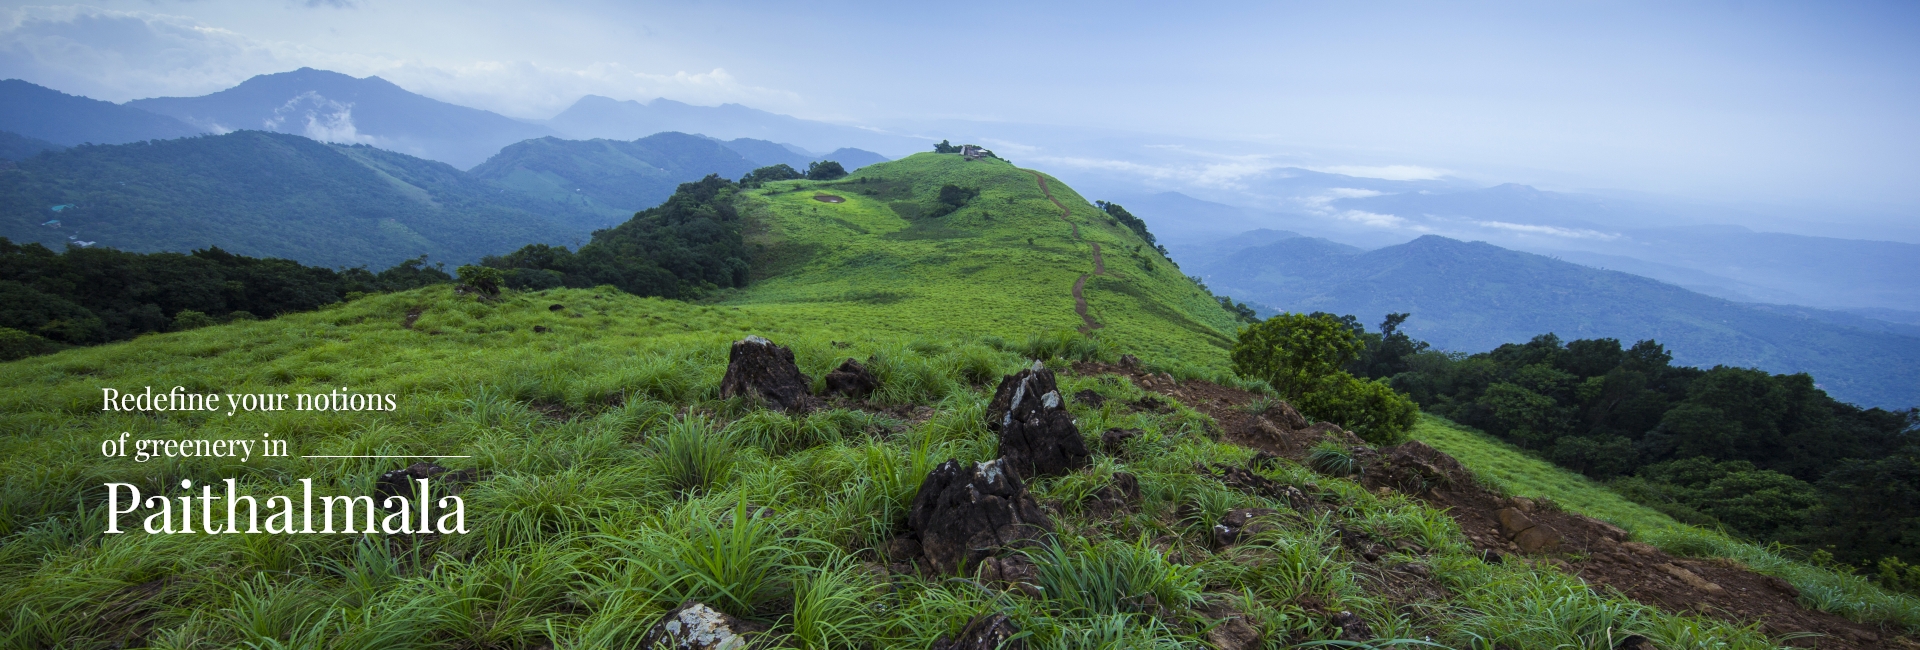 Redefine your notions of greenery in Paithalmala